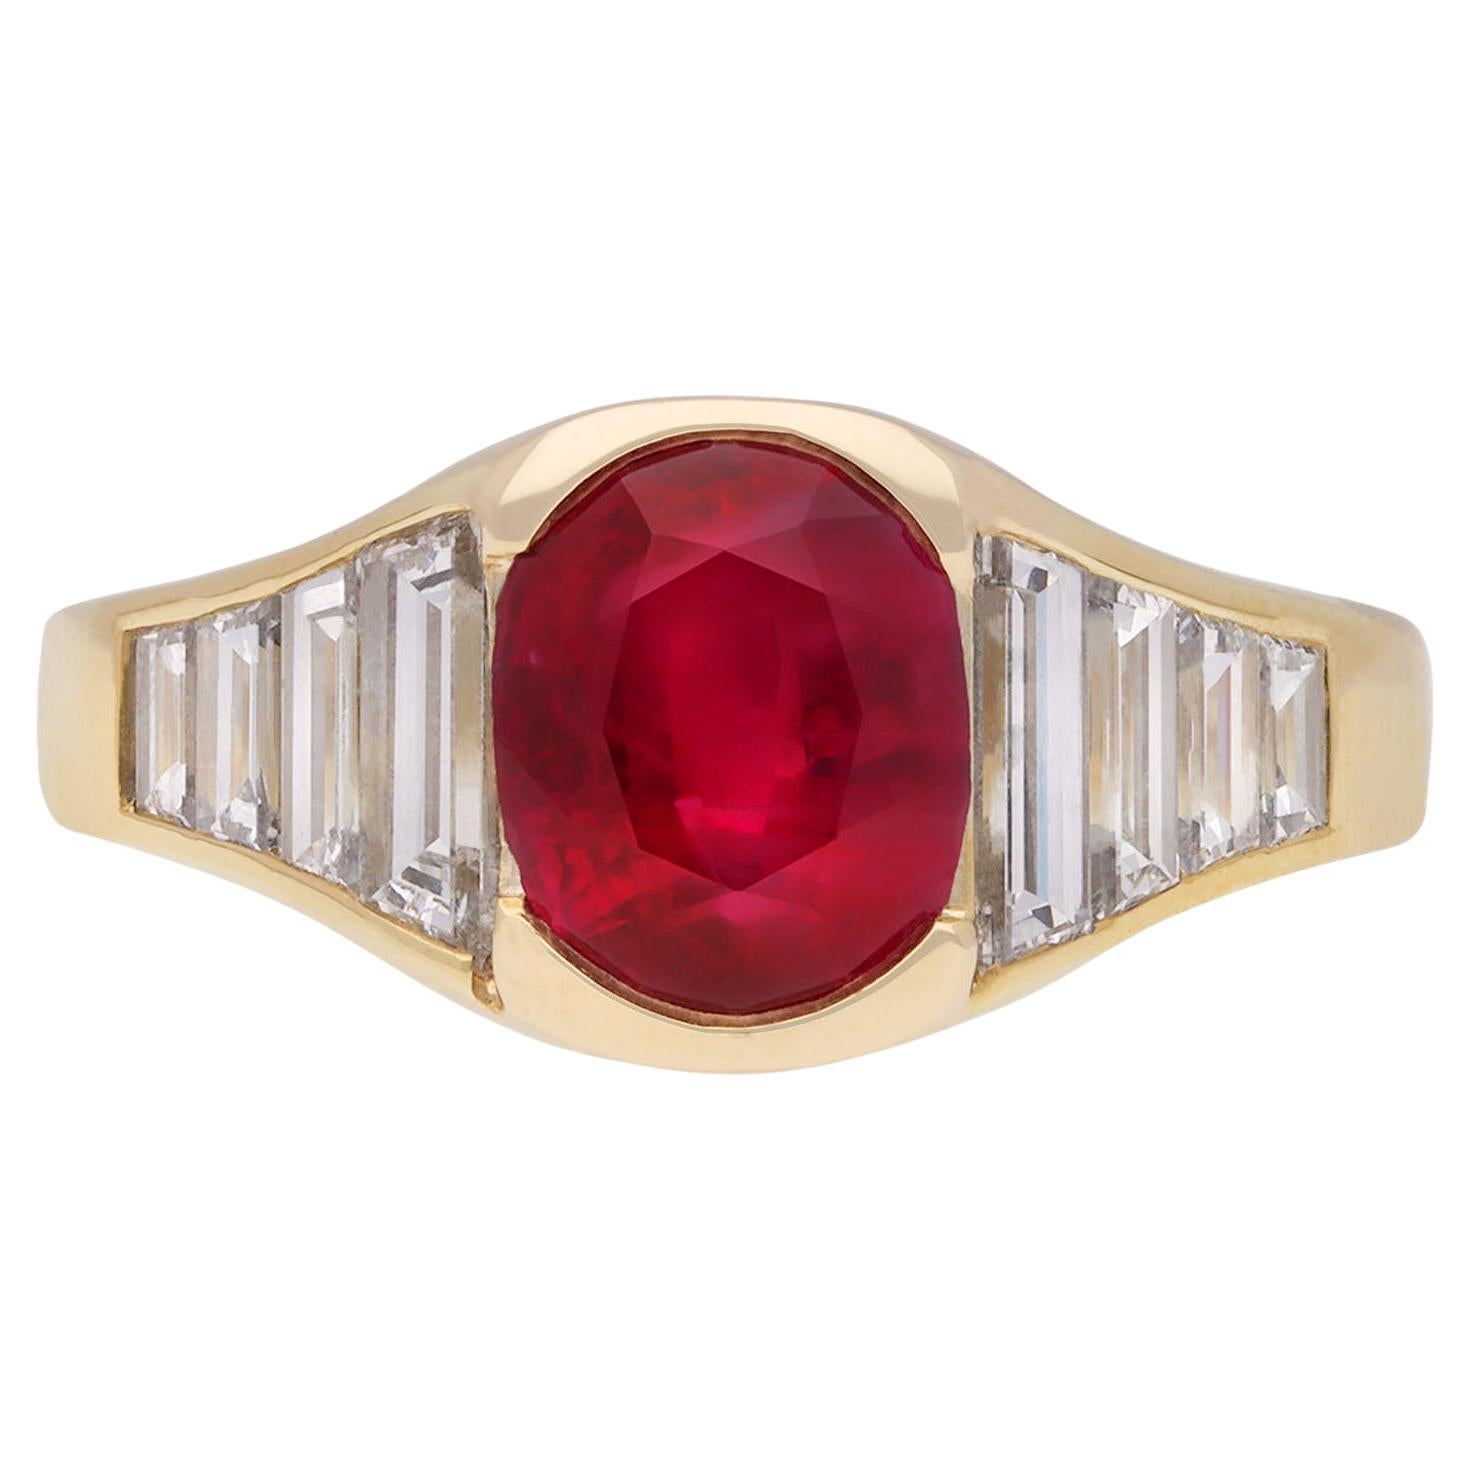 Burmese ruby and diamond flank solitaire ring, circa 1950.